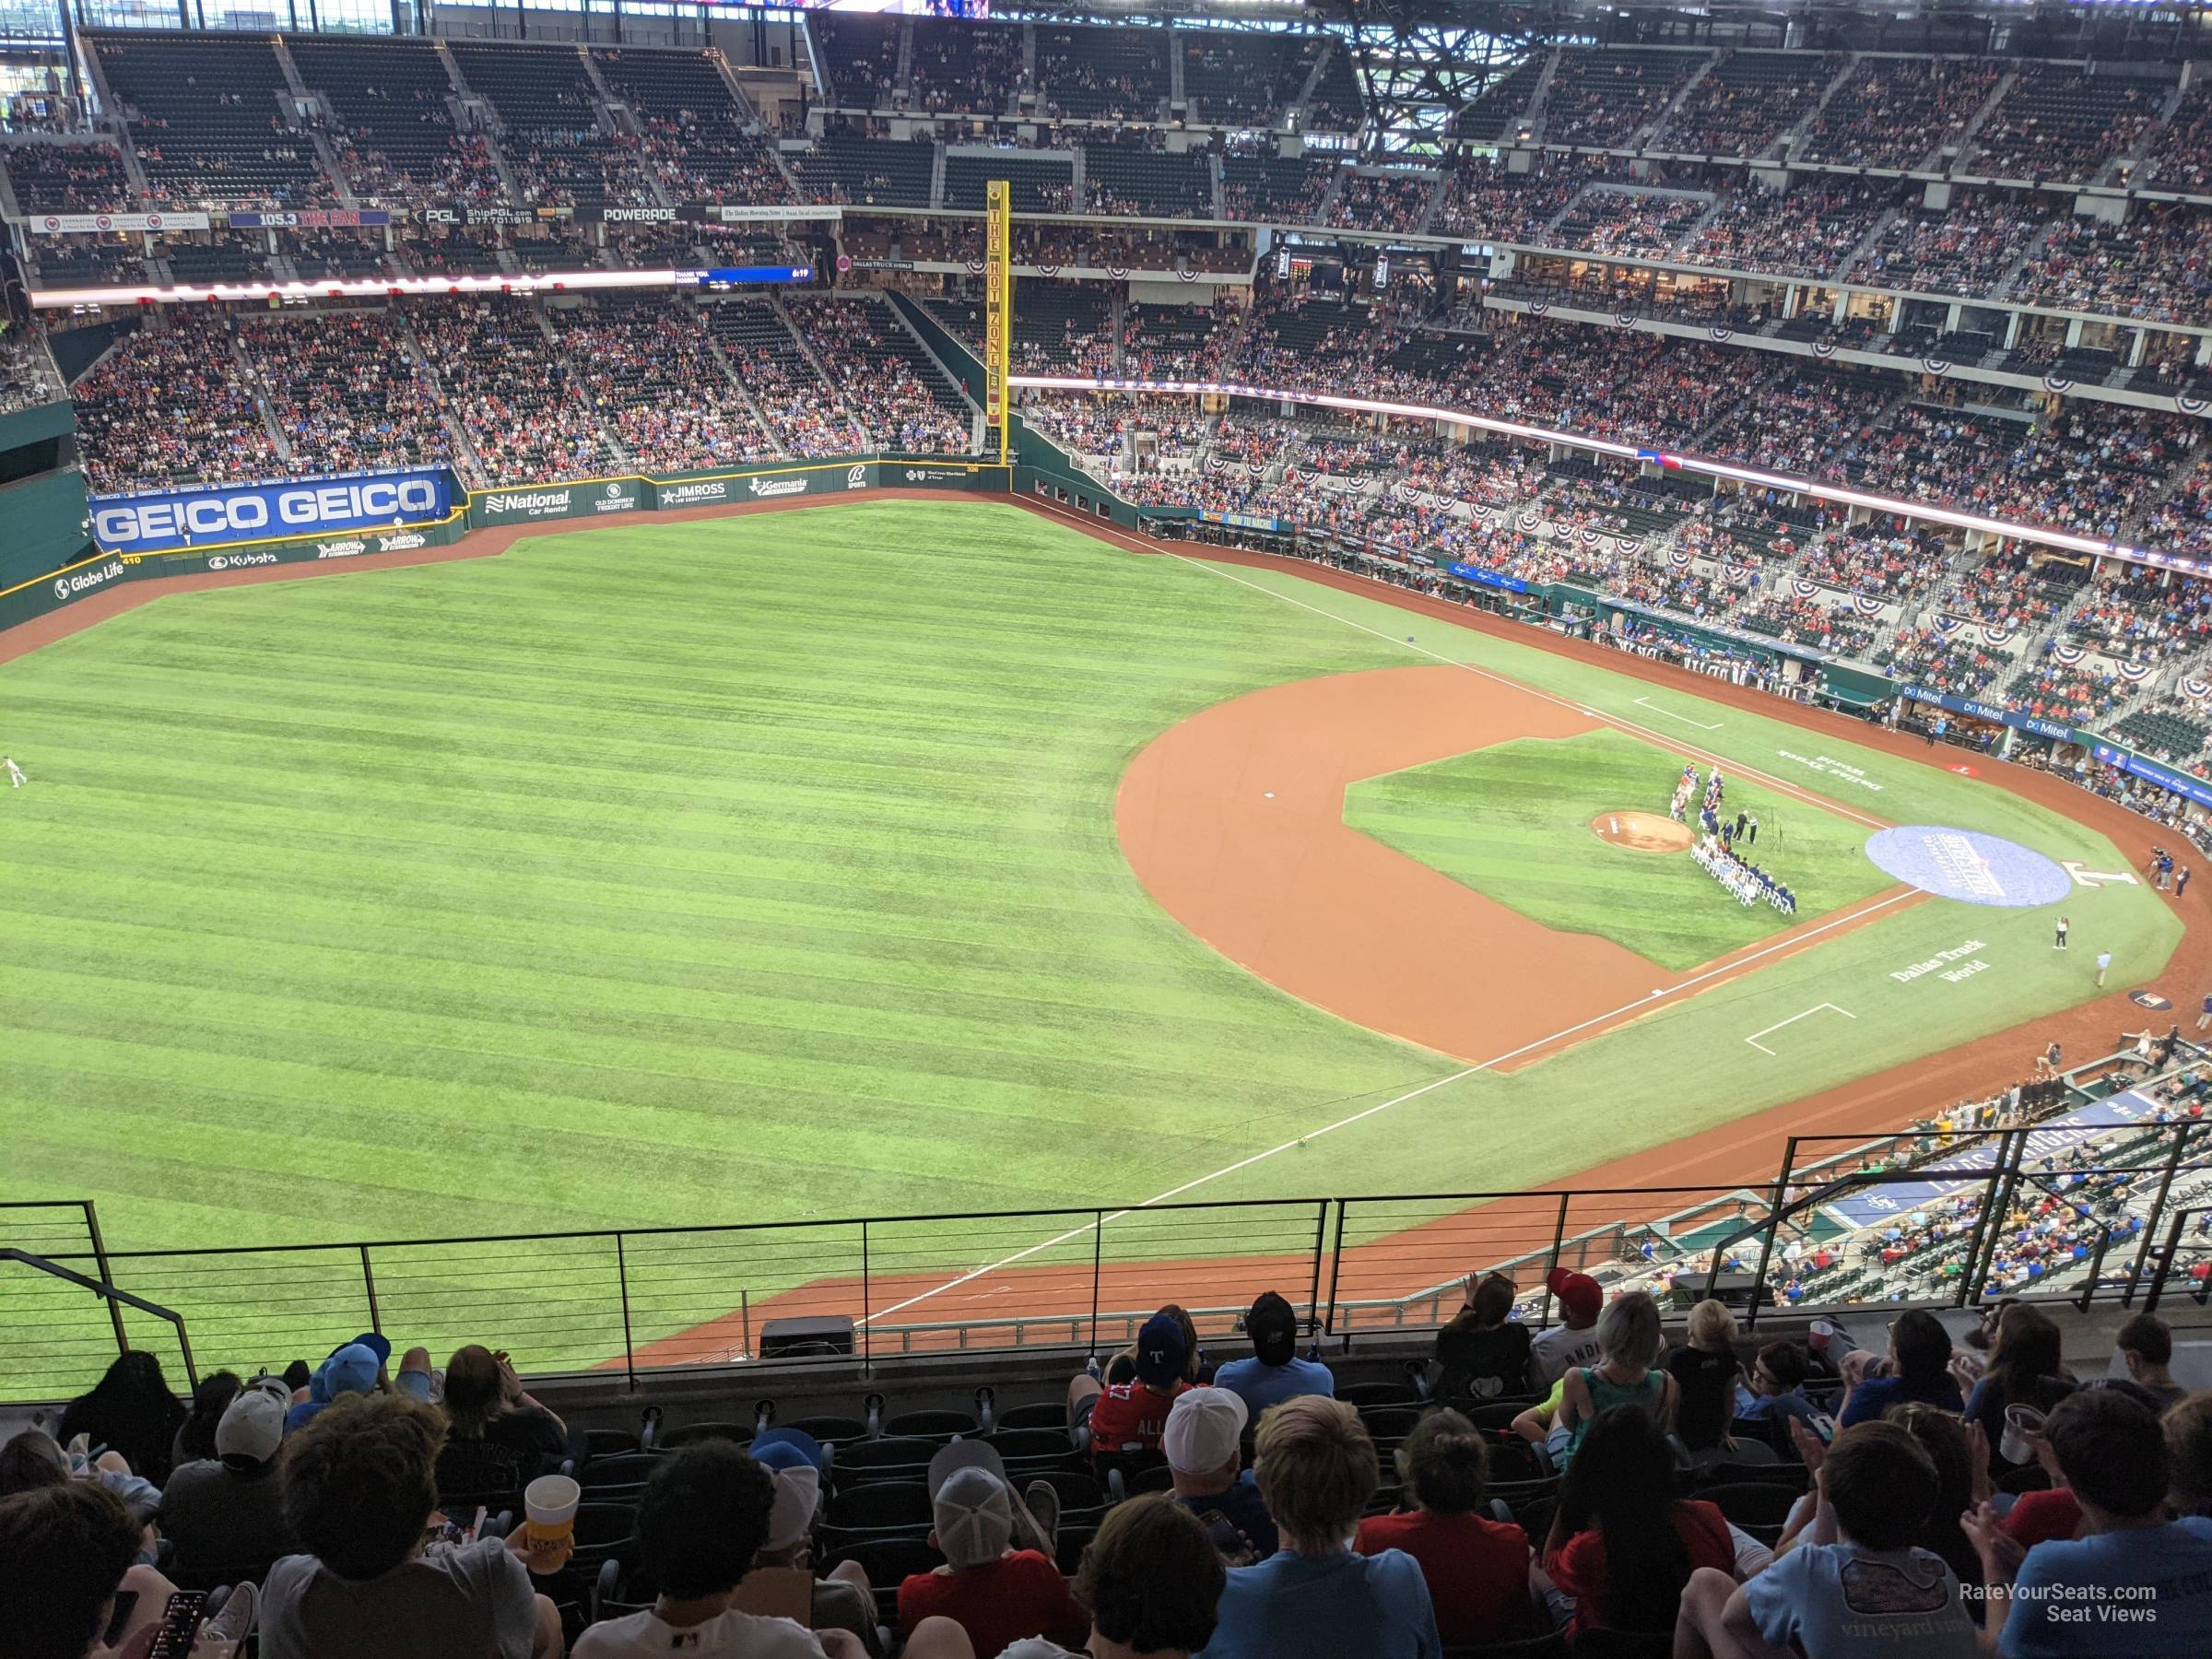 Section 302 at Globe Life Field - RateYourSeats.com